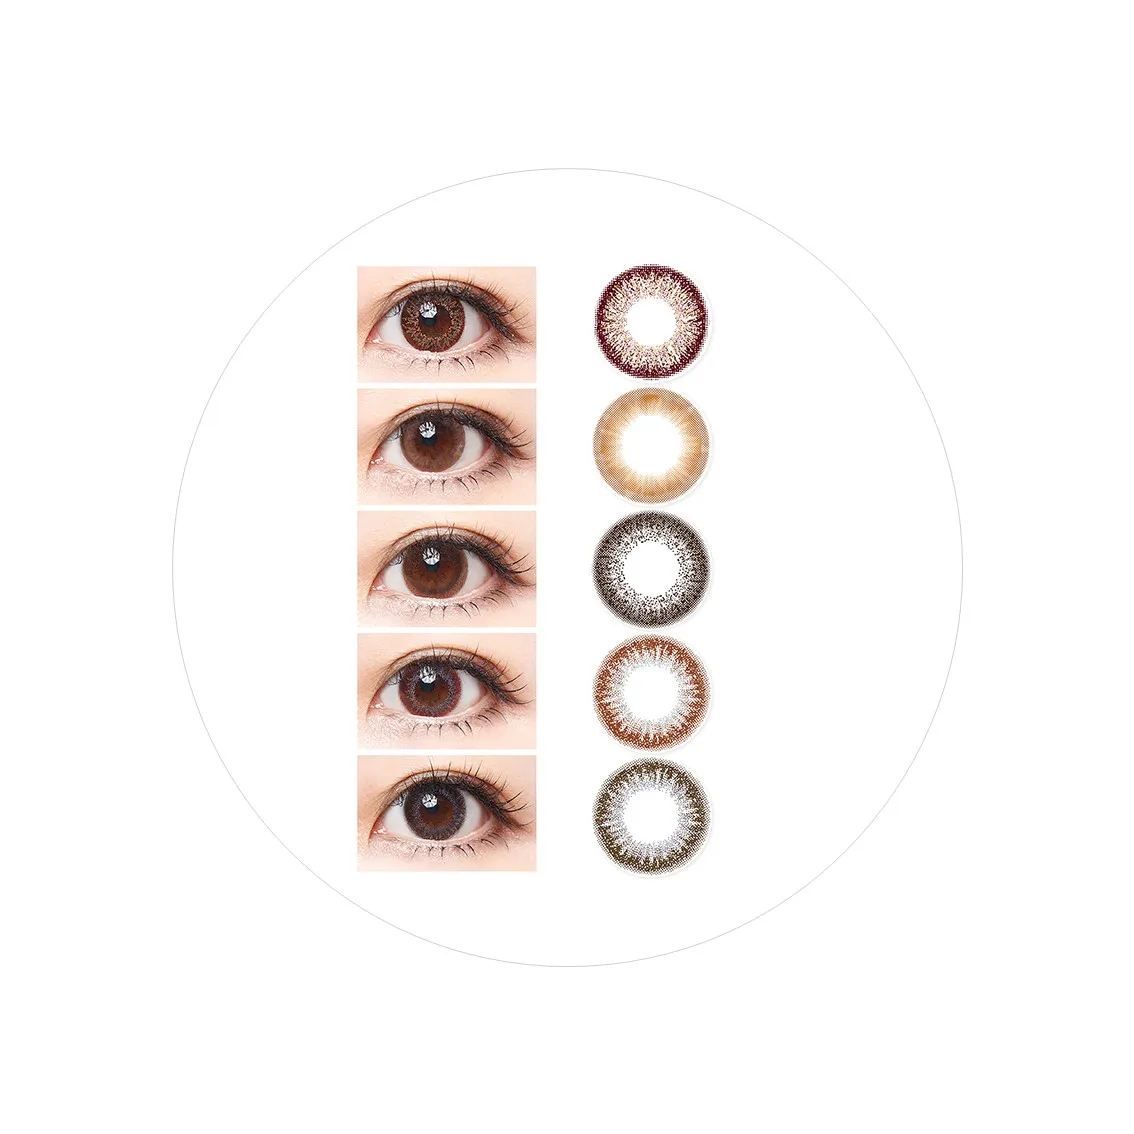 38% Monthly 14mm Polymacon Brown Choco Color Contact Lenses | Soft And Comfortable | High Quality | UV Blocking